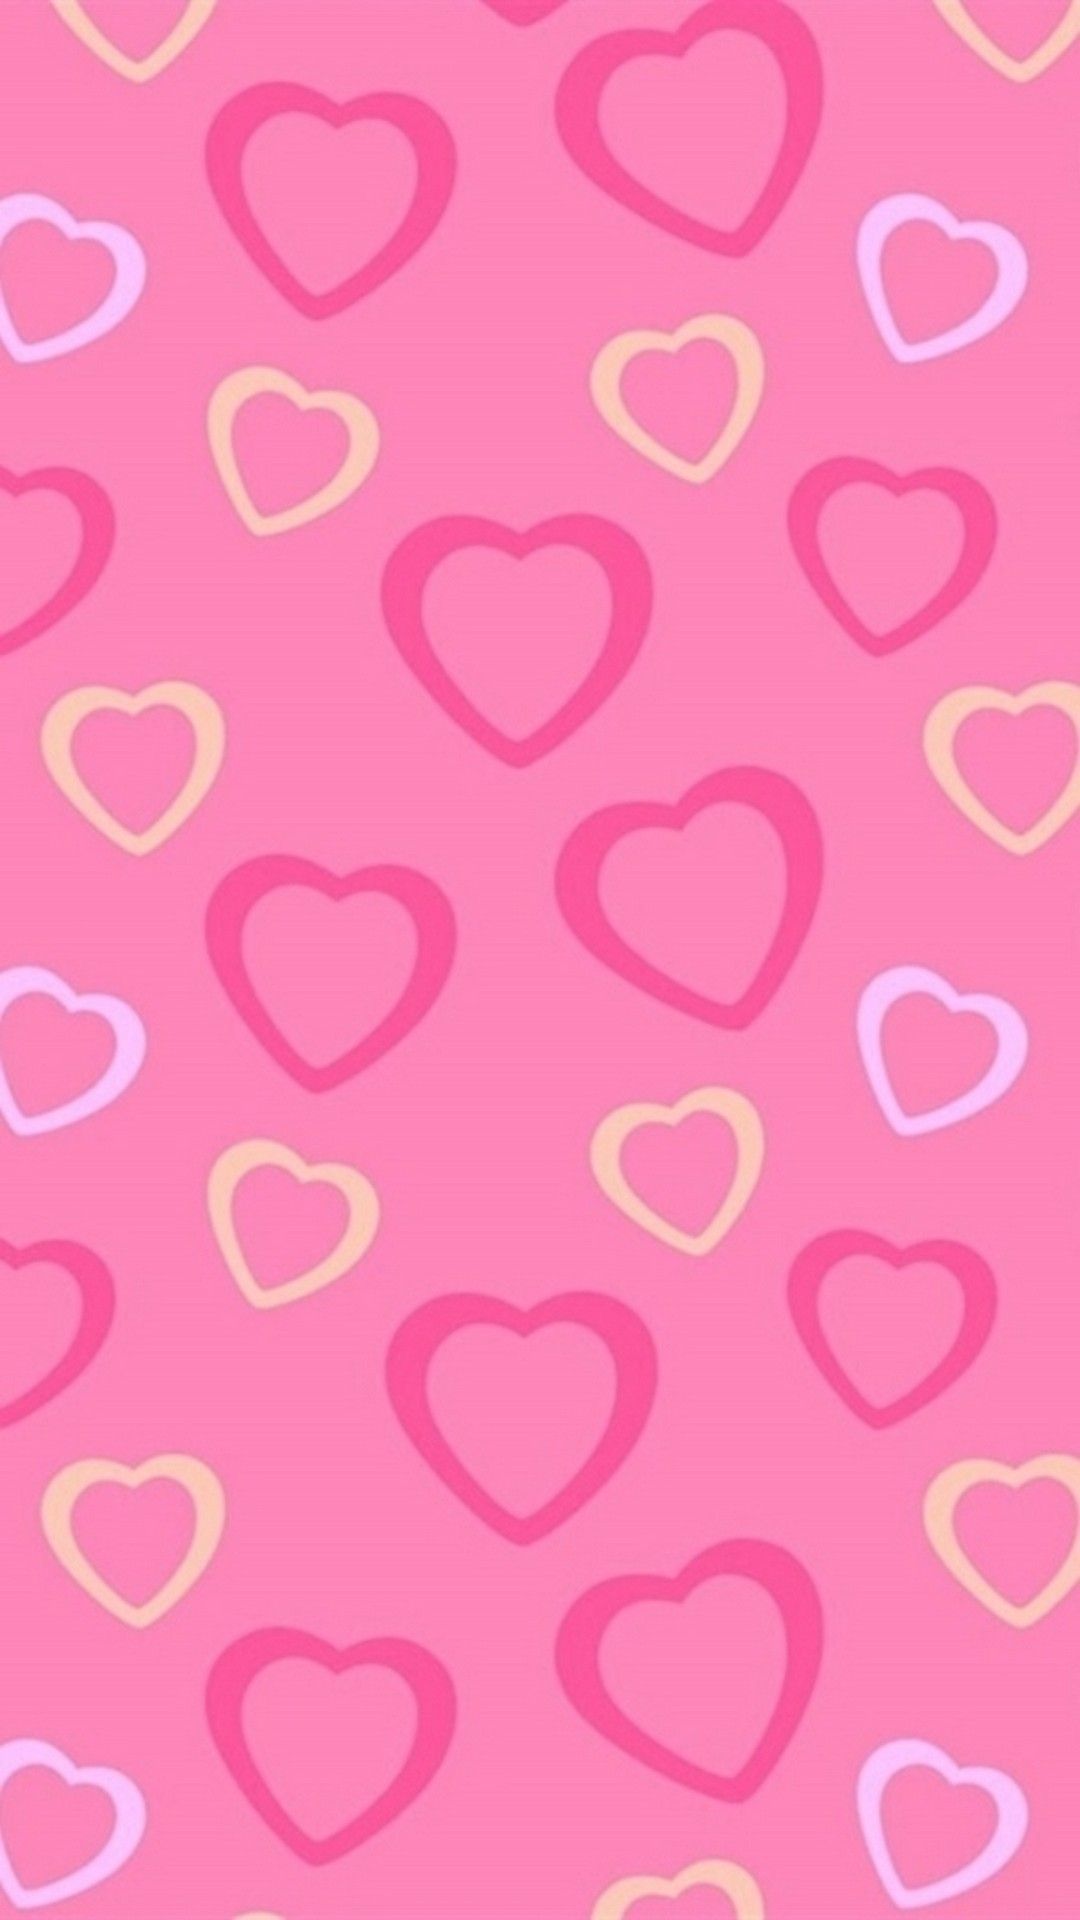 Girly wallpaper for your phone